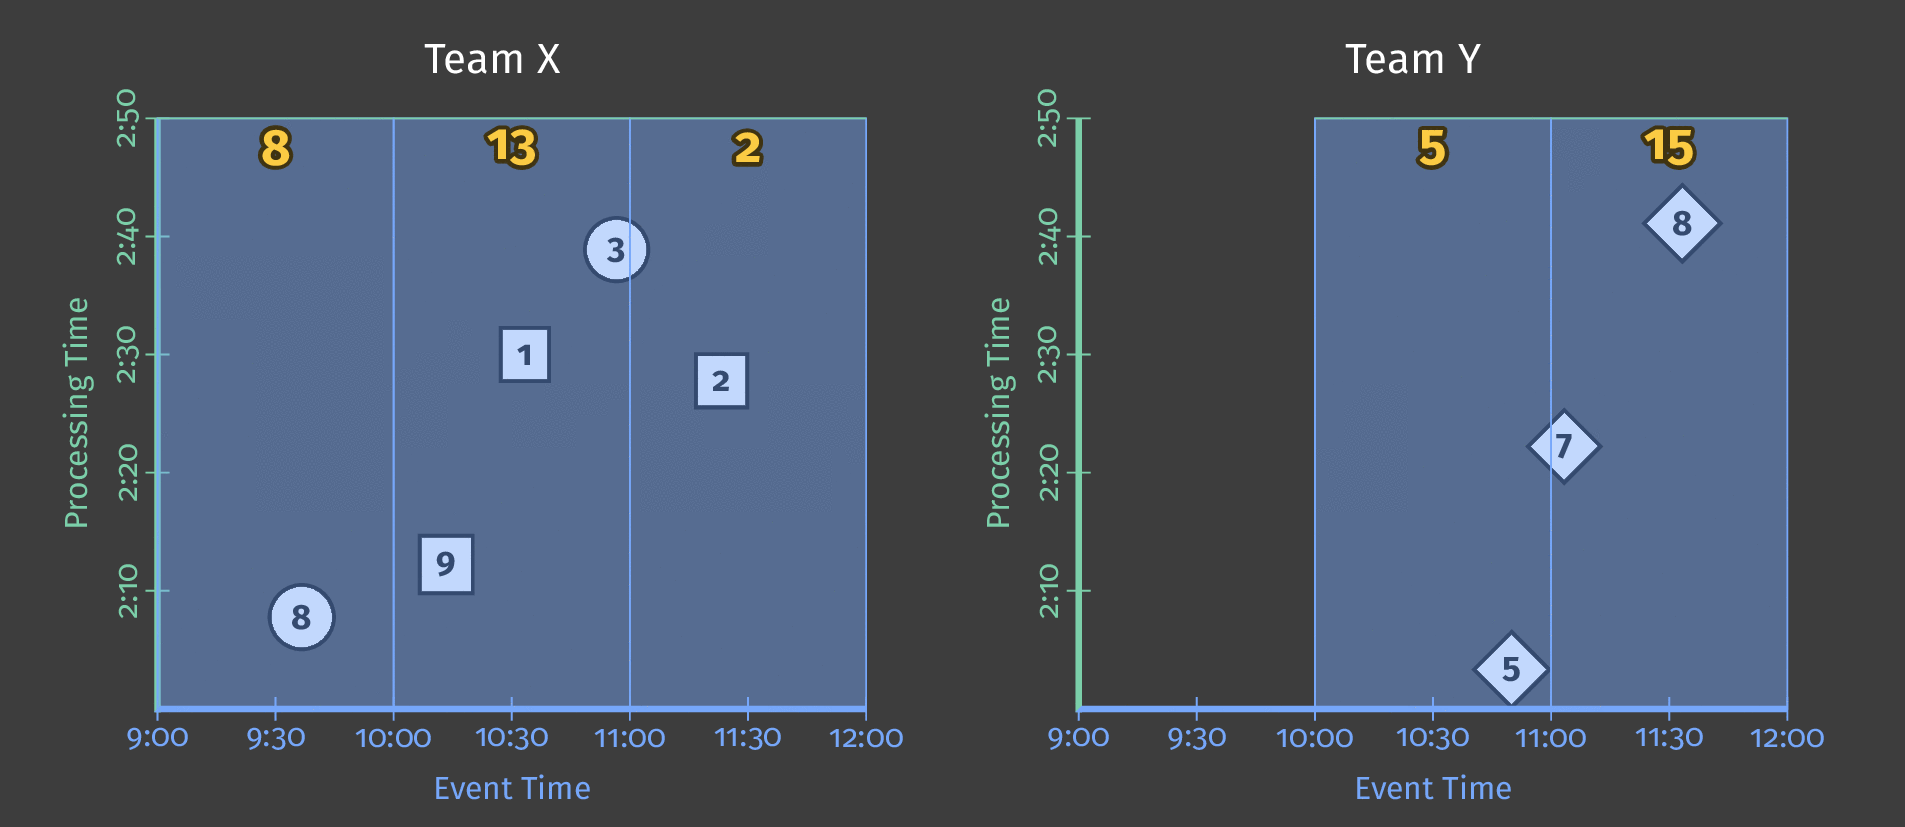 Summing users' scores by hour